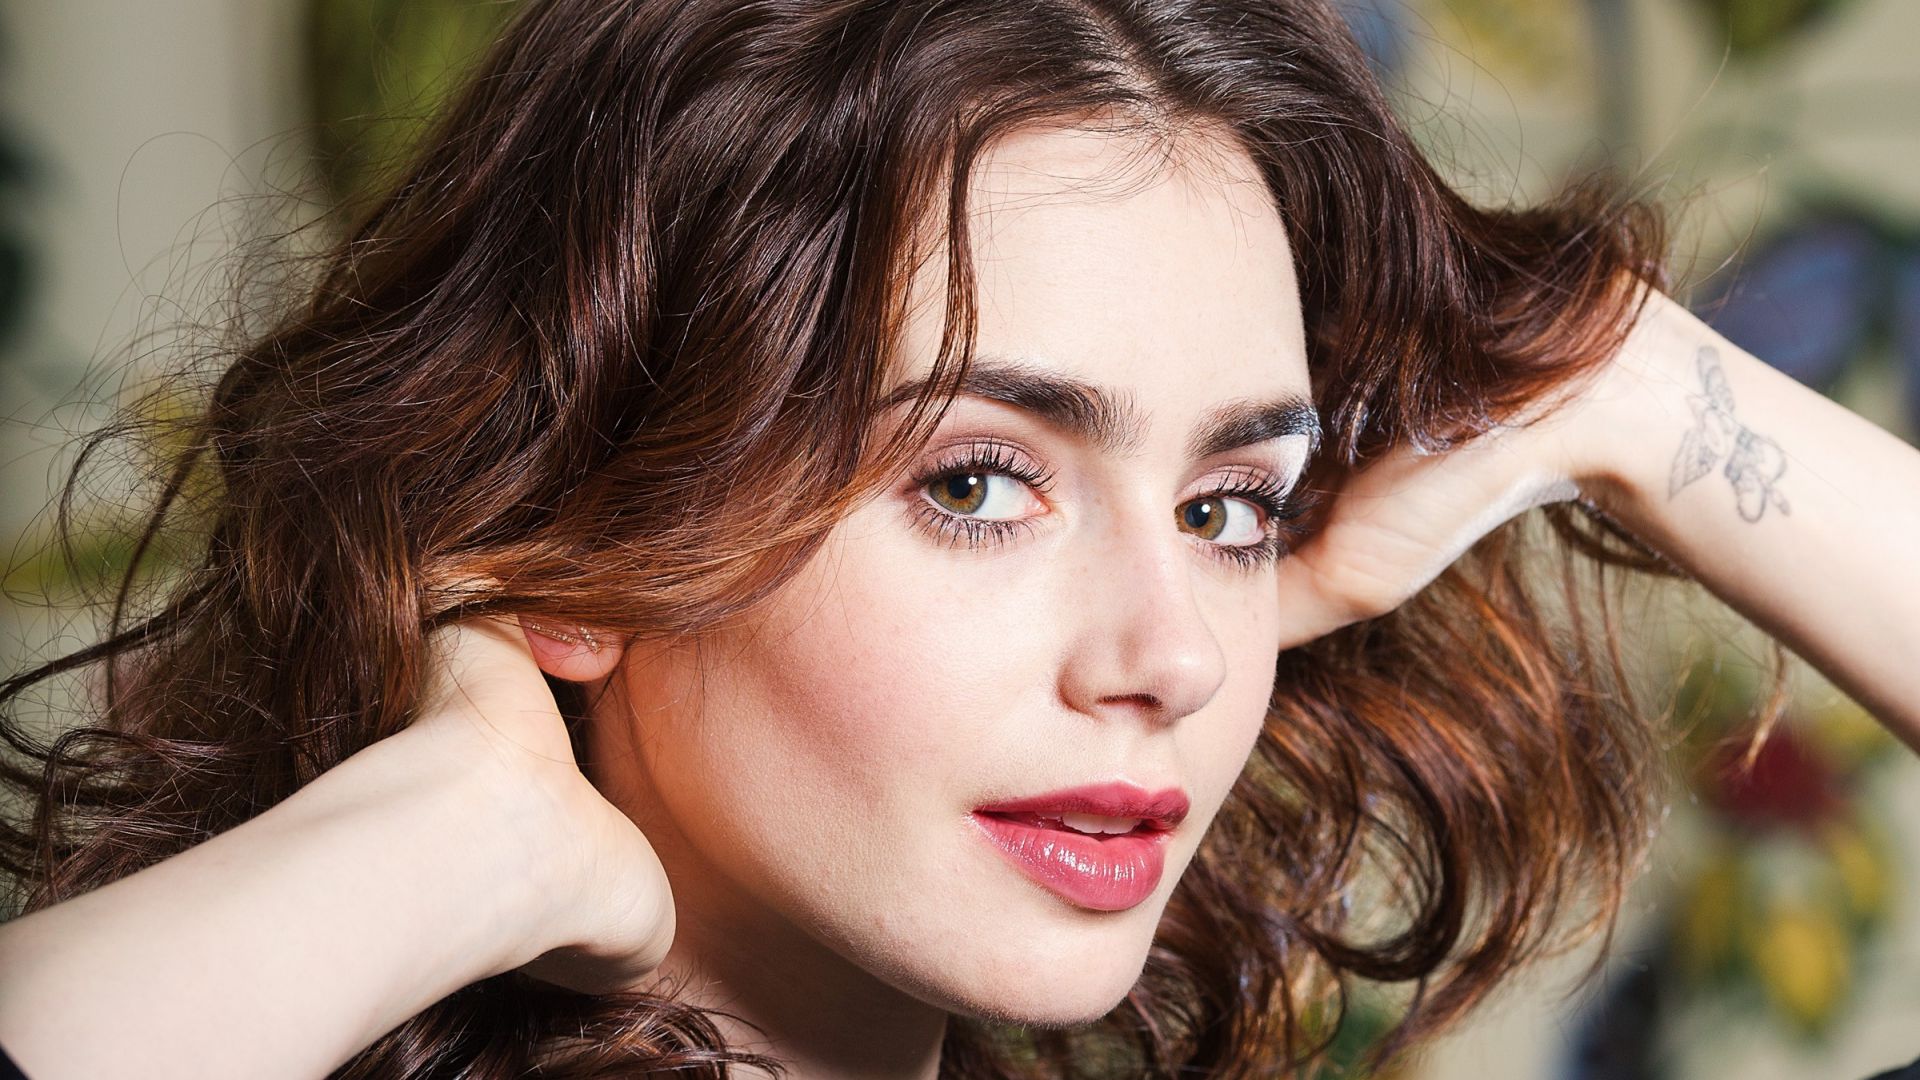 Wallpaper Lily collins's cute face